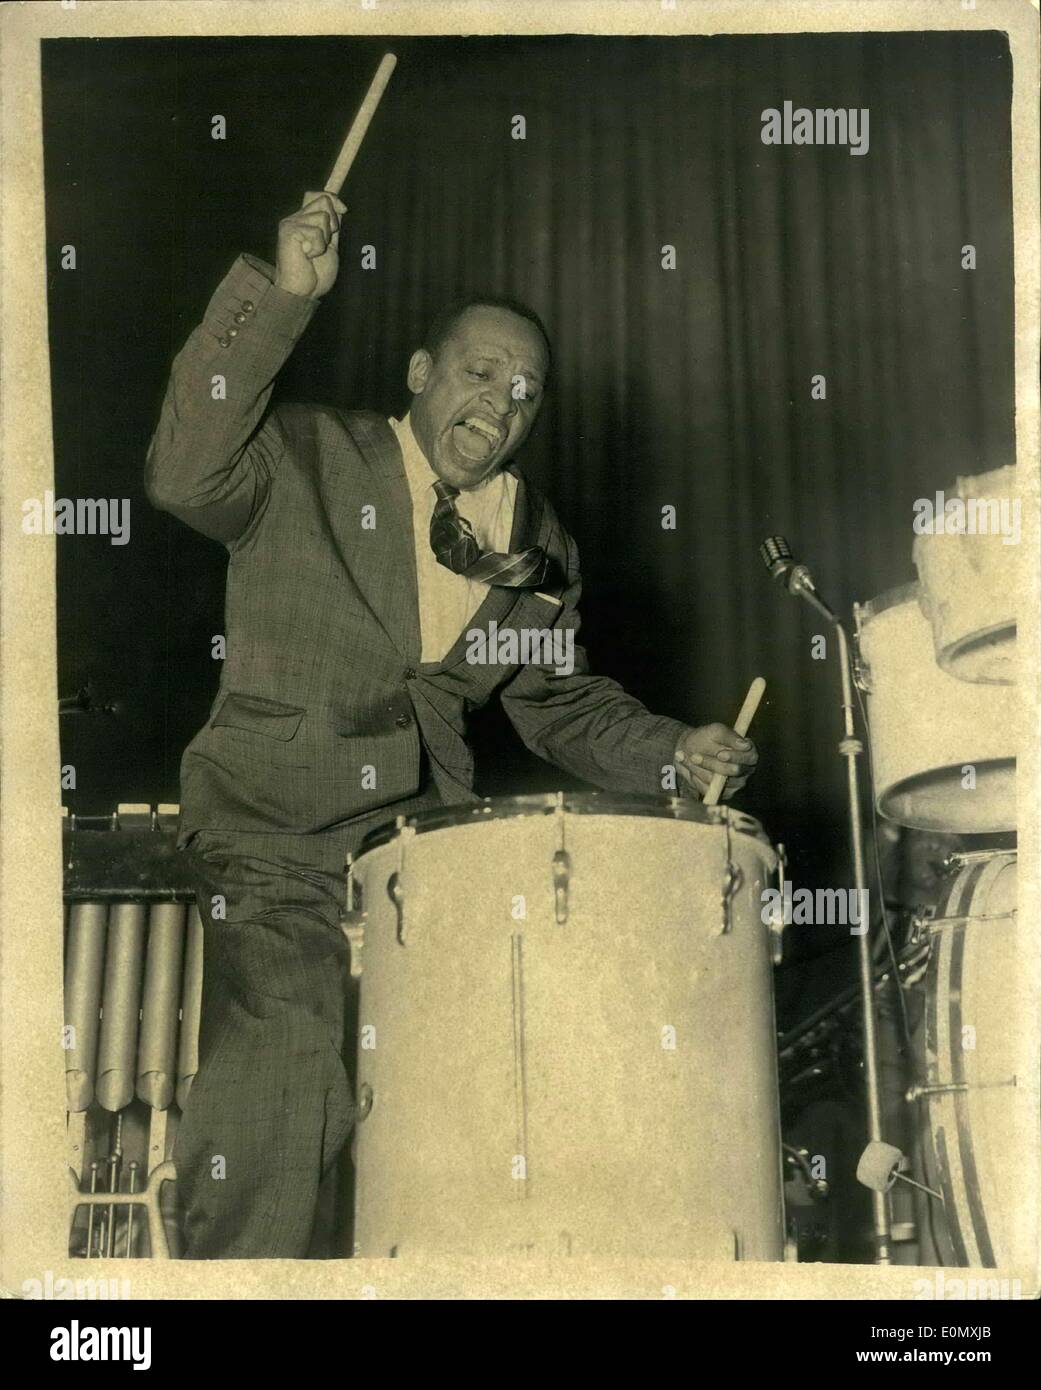 Oct. 21, 1956 - America's Rock N' Roll King Gives His First Performance At The Empress Hall. America's Rock N' Roll king, Lionel Hampton who arrived in Britain with his band to start a week's tour, opened with his first performance at the Empress Hall, Earls Court. Photo Shows: Lionel Hampton in action as he plays the drums during his performance. Stock Photo